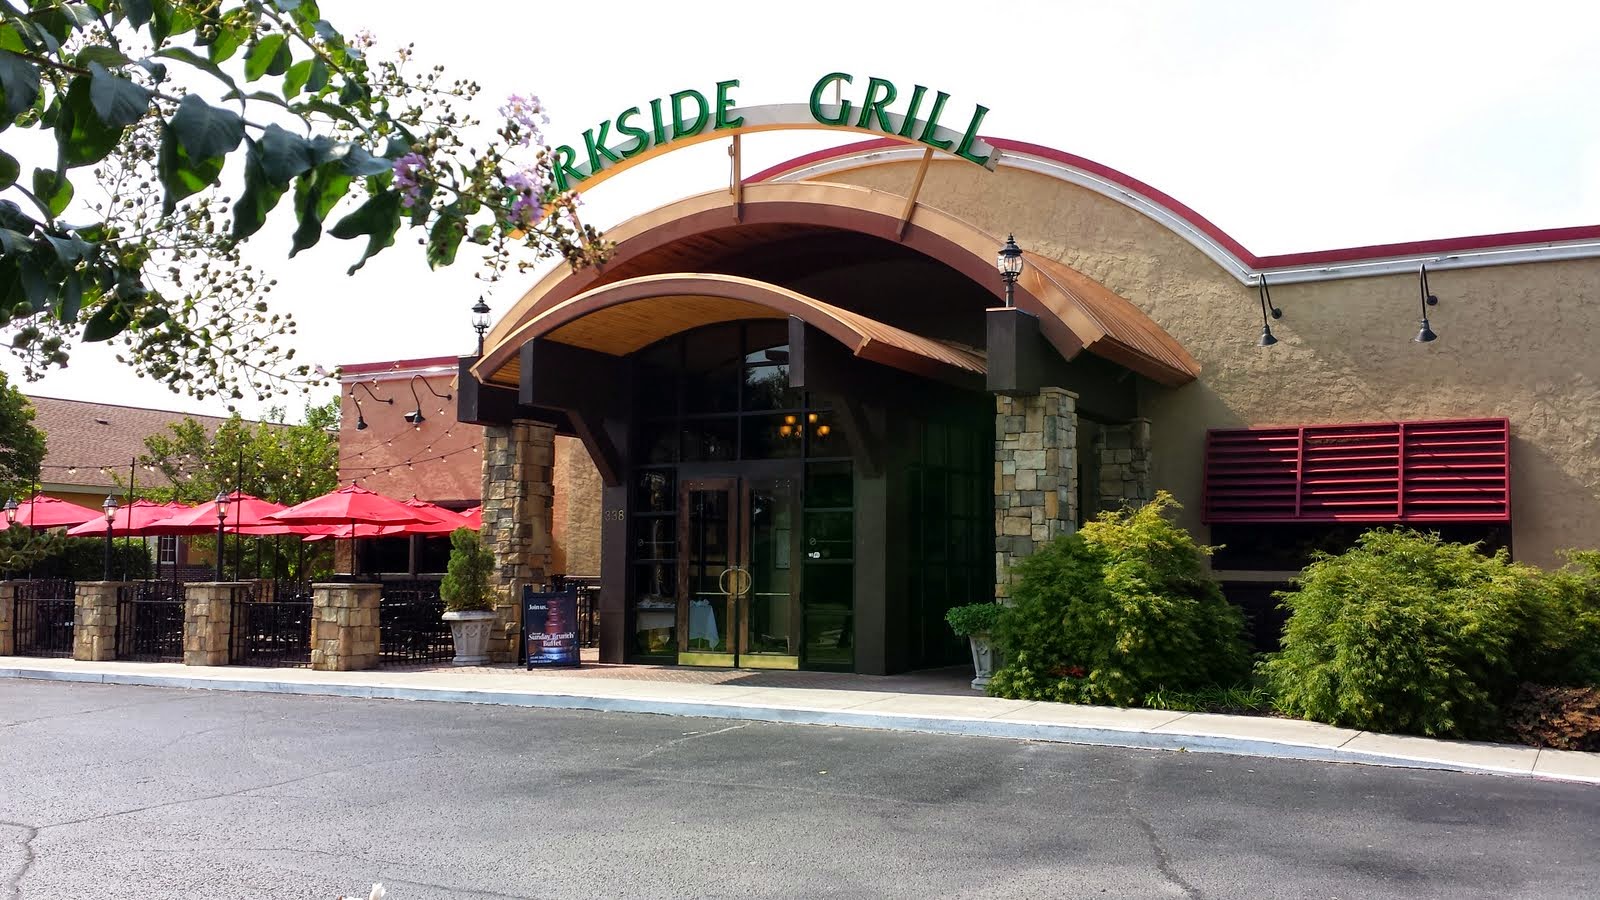 Big Daddy Dave Parkside Grill Knoxville Tn